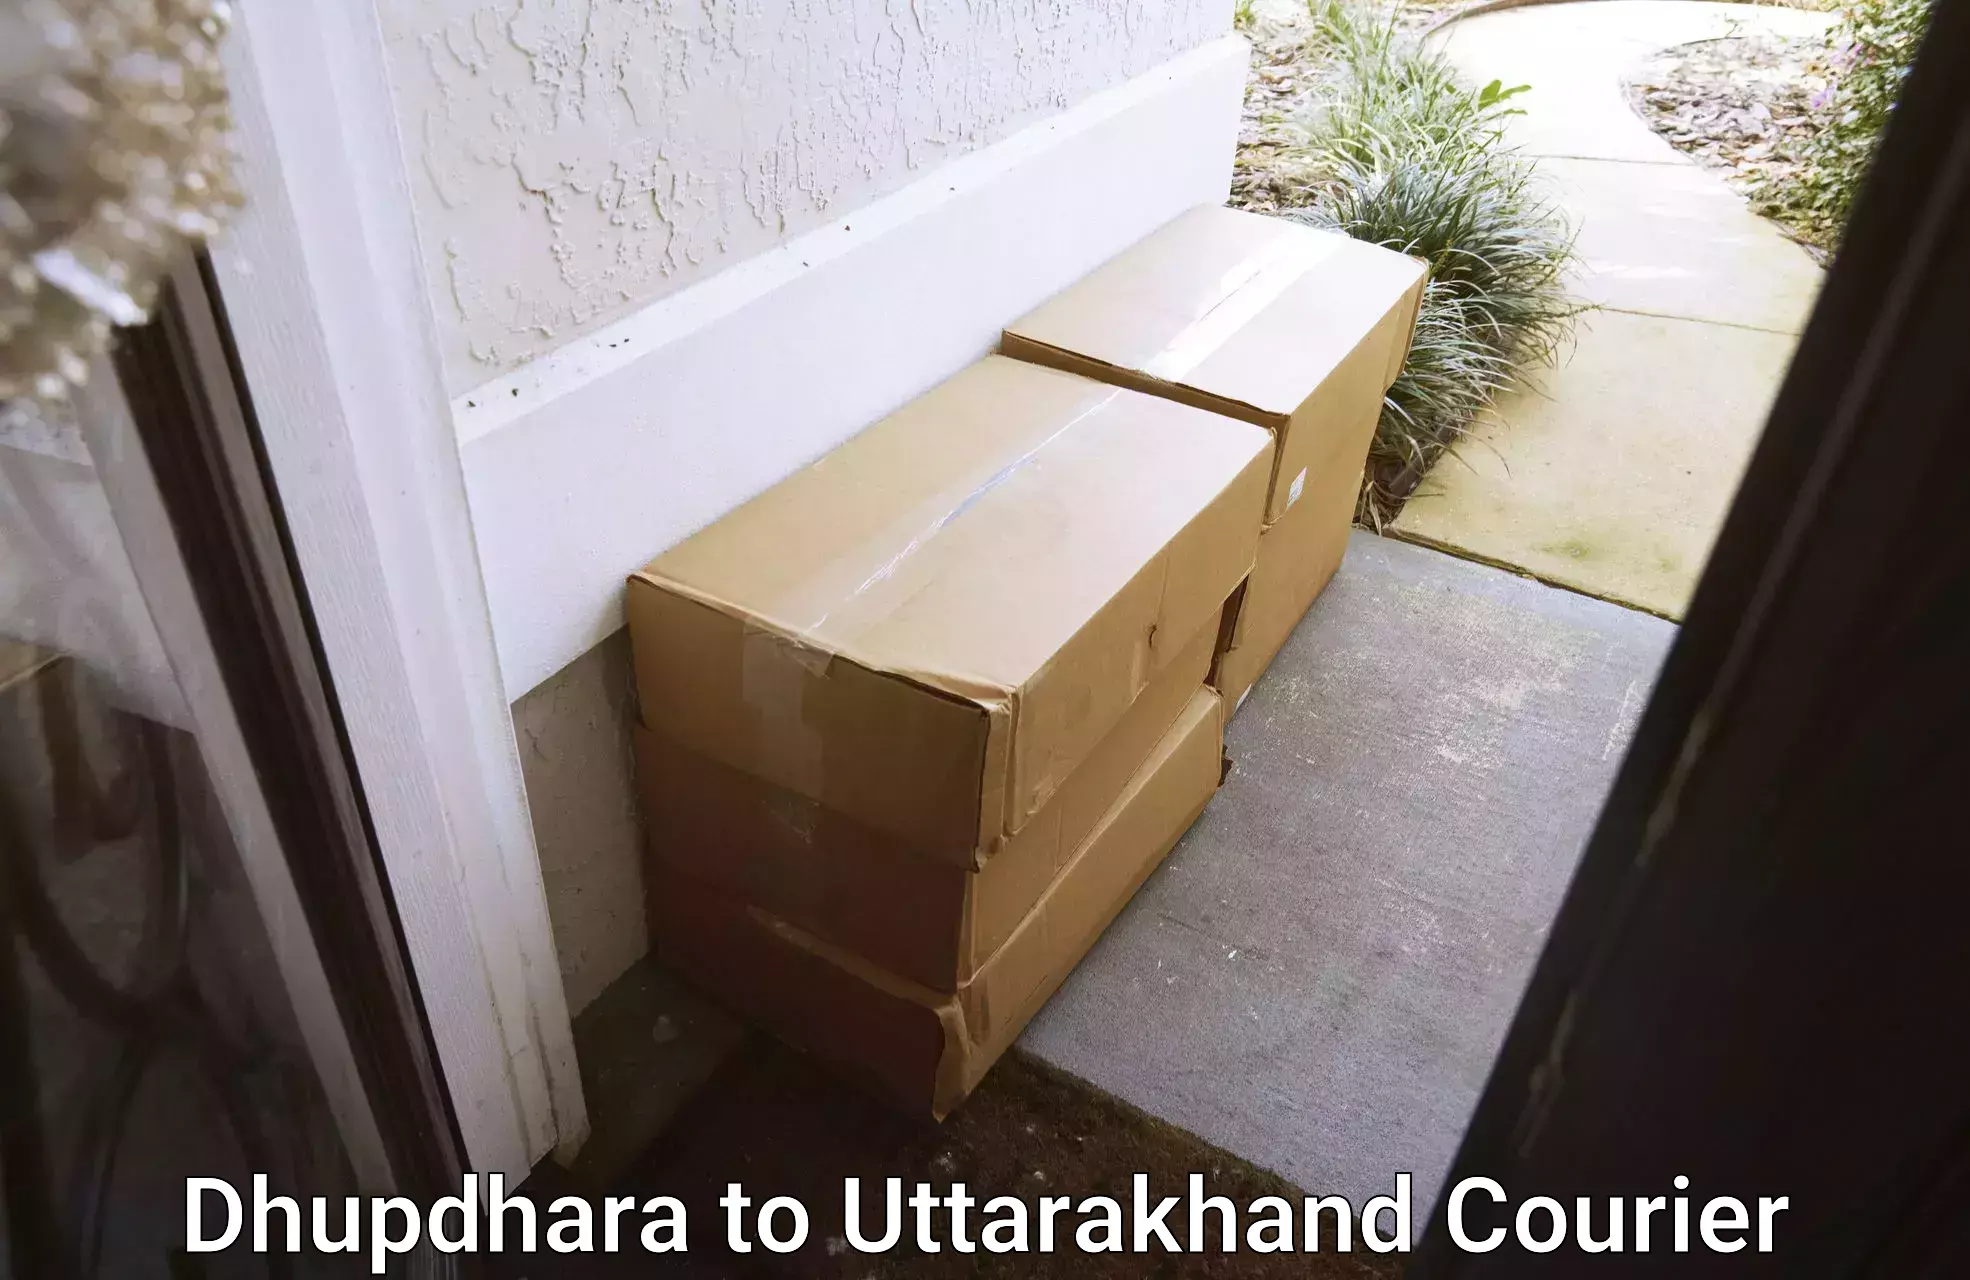 Parcel service for businesses Dhupdhara to Bhagwanpur